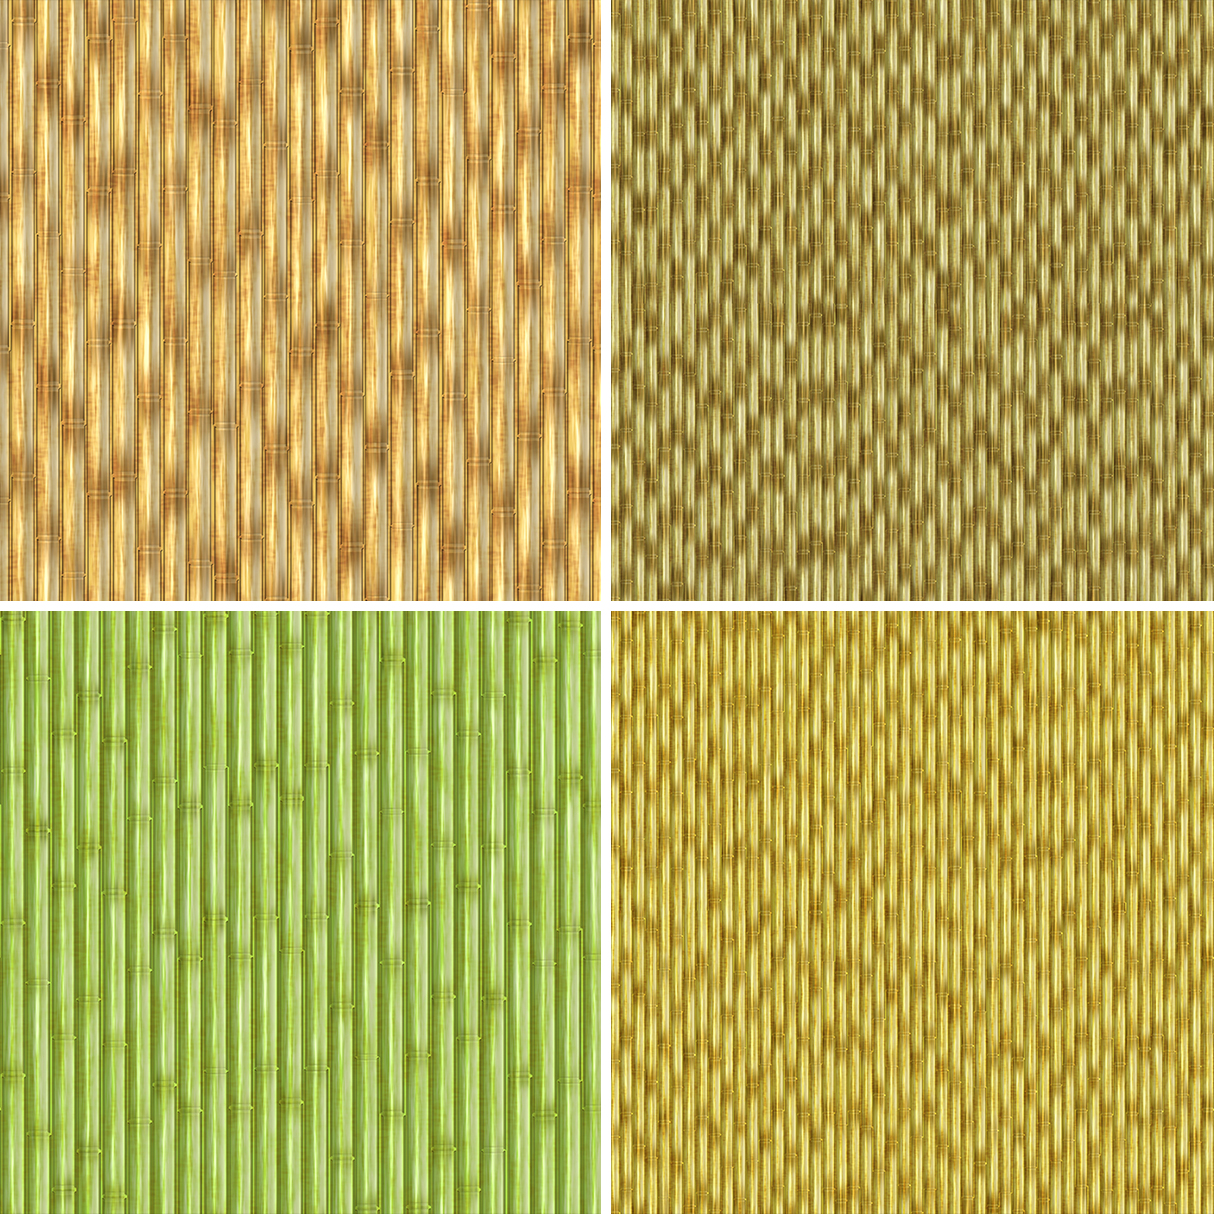 20 Bamboo Background Textures Square Samples Preview 3